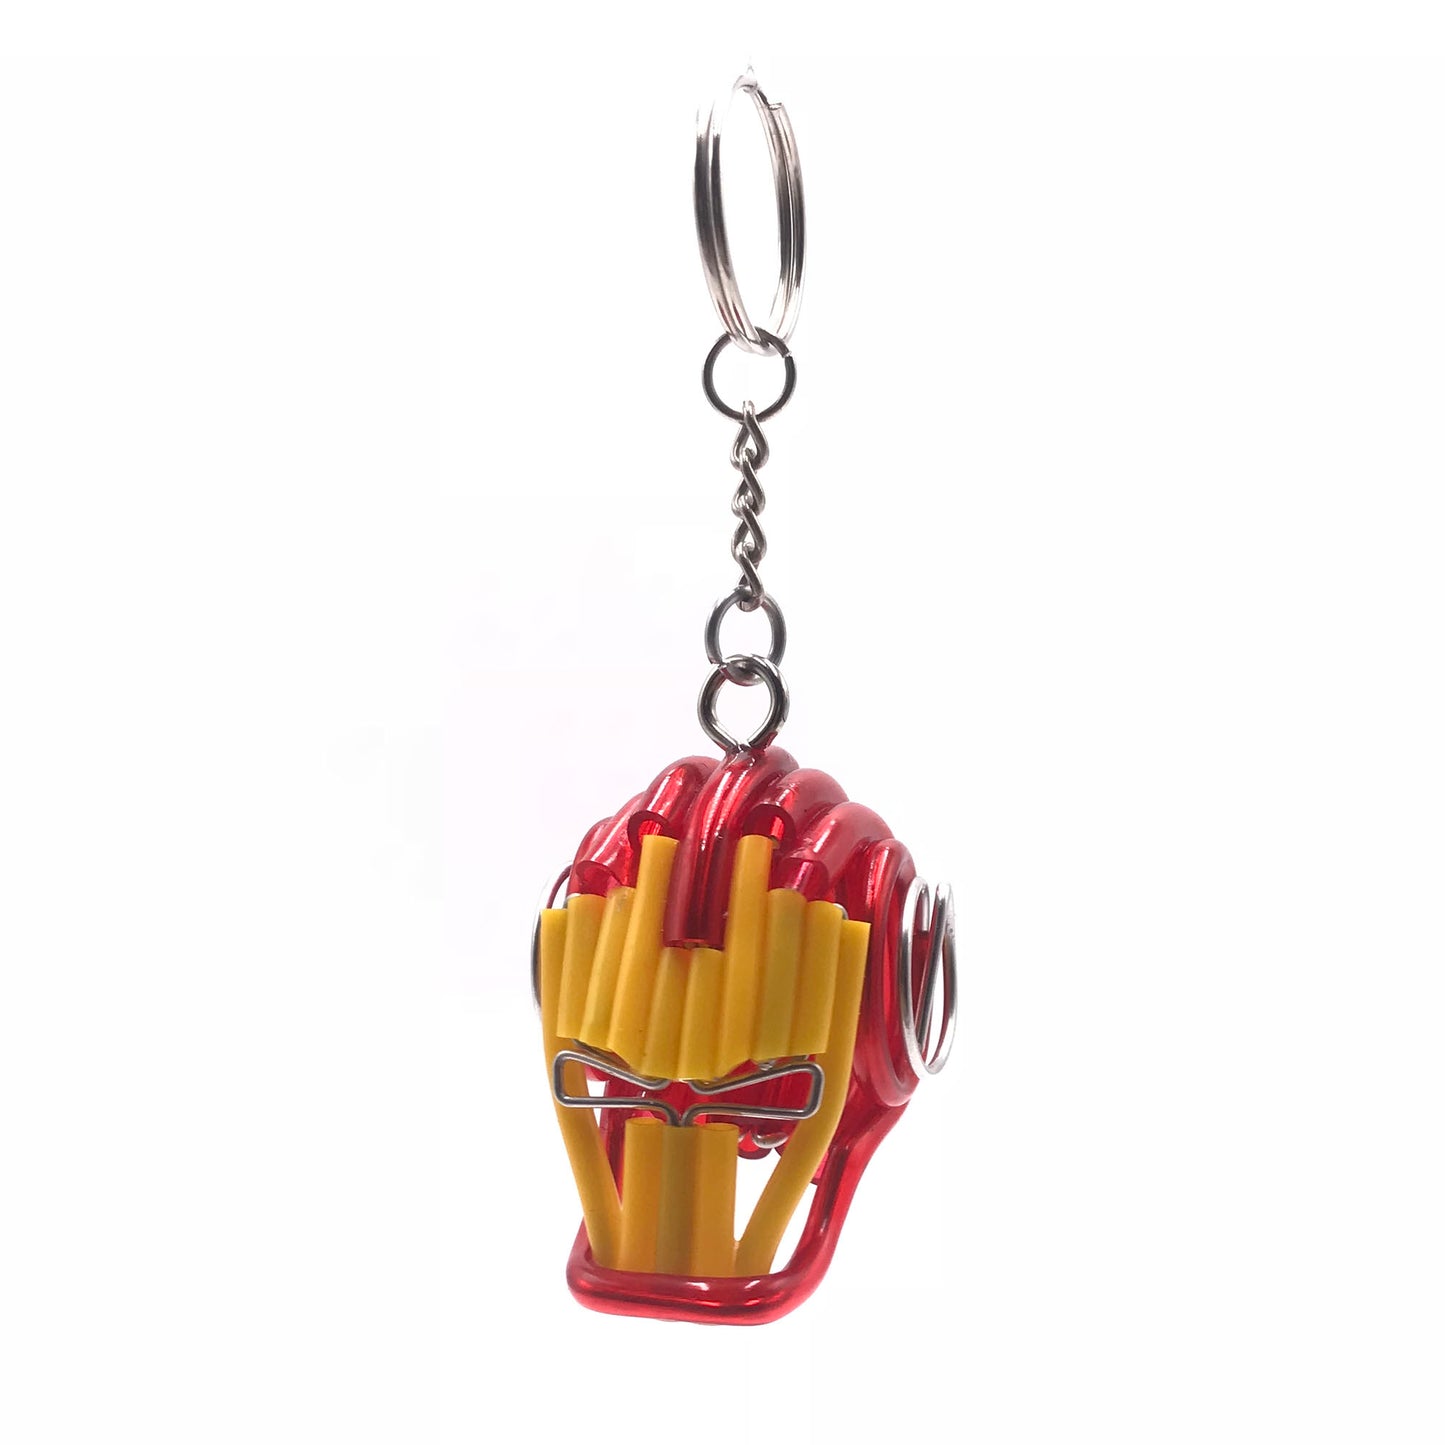 Miniature Wire art Iron Man Head Keychain hand-crafted from aluminium wire